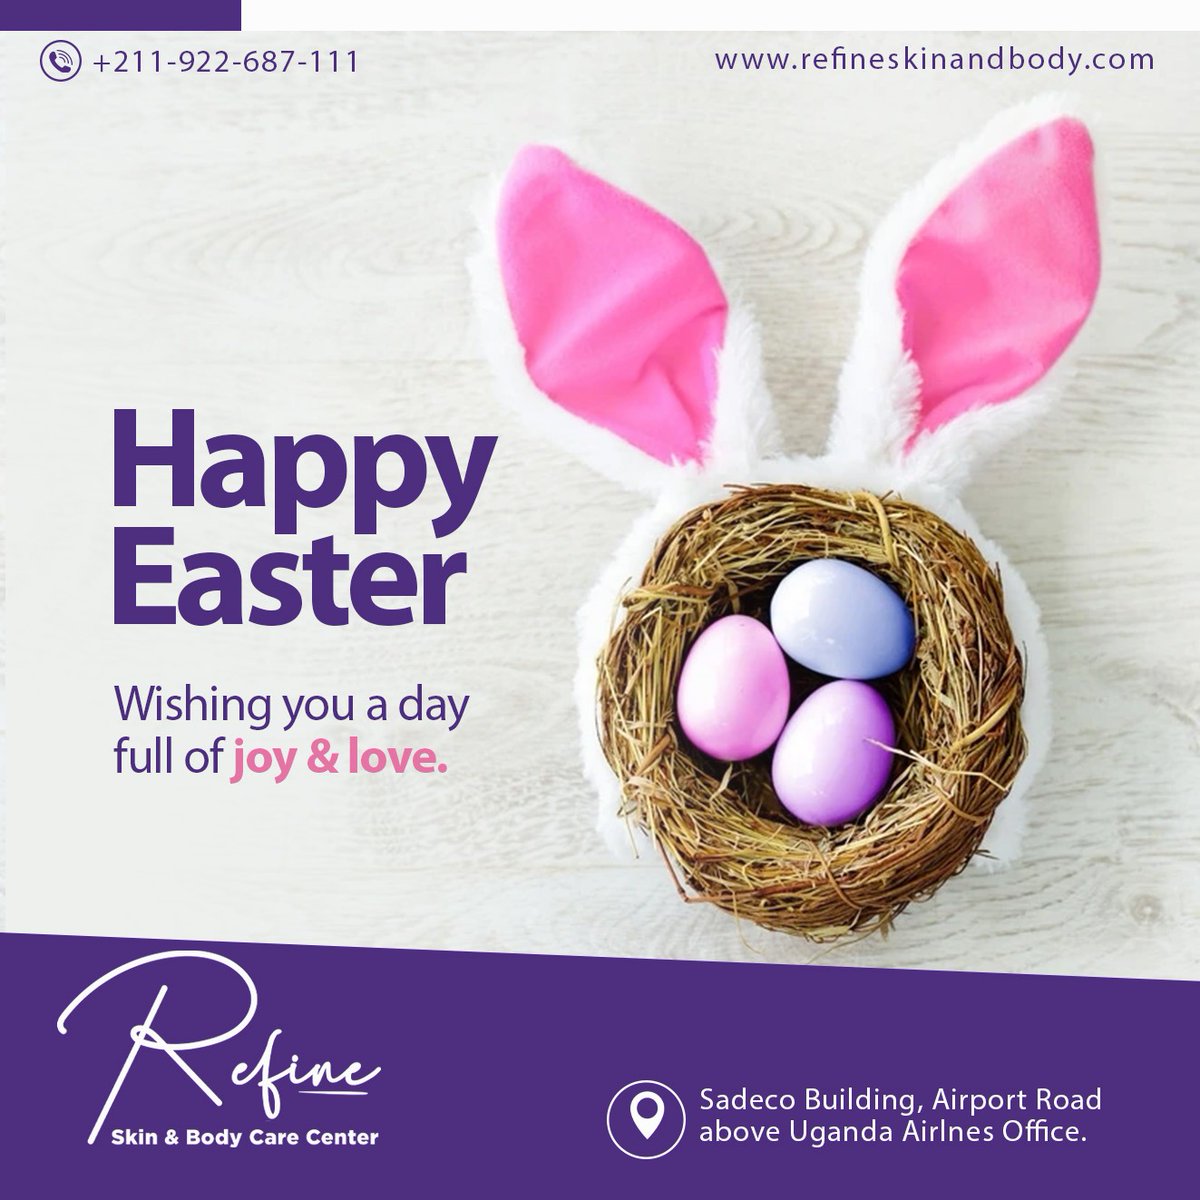 'Easter spells out beauty, the rare beauty of new life' ~ S.D.GORDON

#HappyEaster #RefineskinandBodyClinc #NewLife #easterholidays2023 #weekendvibes